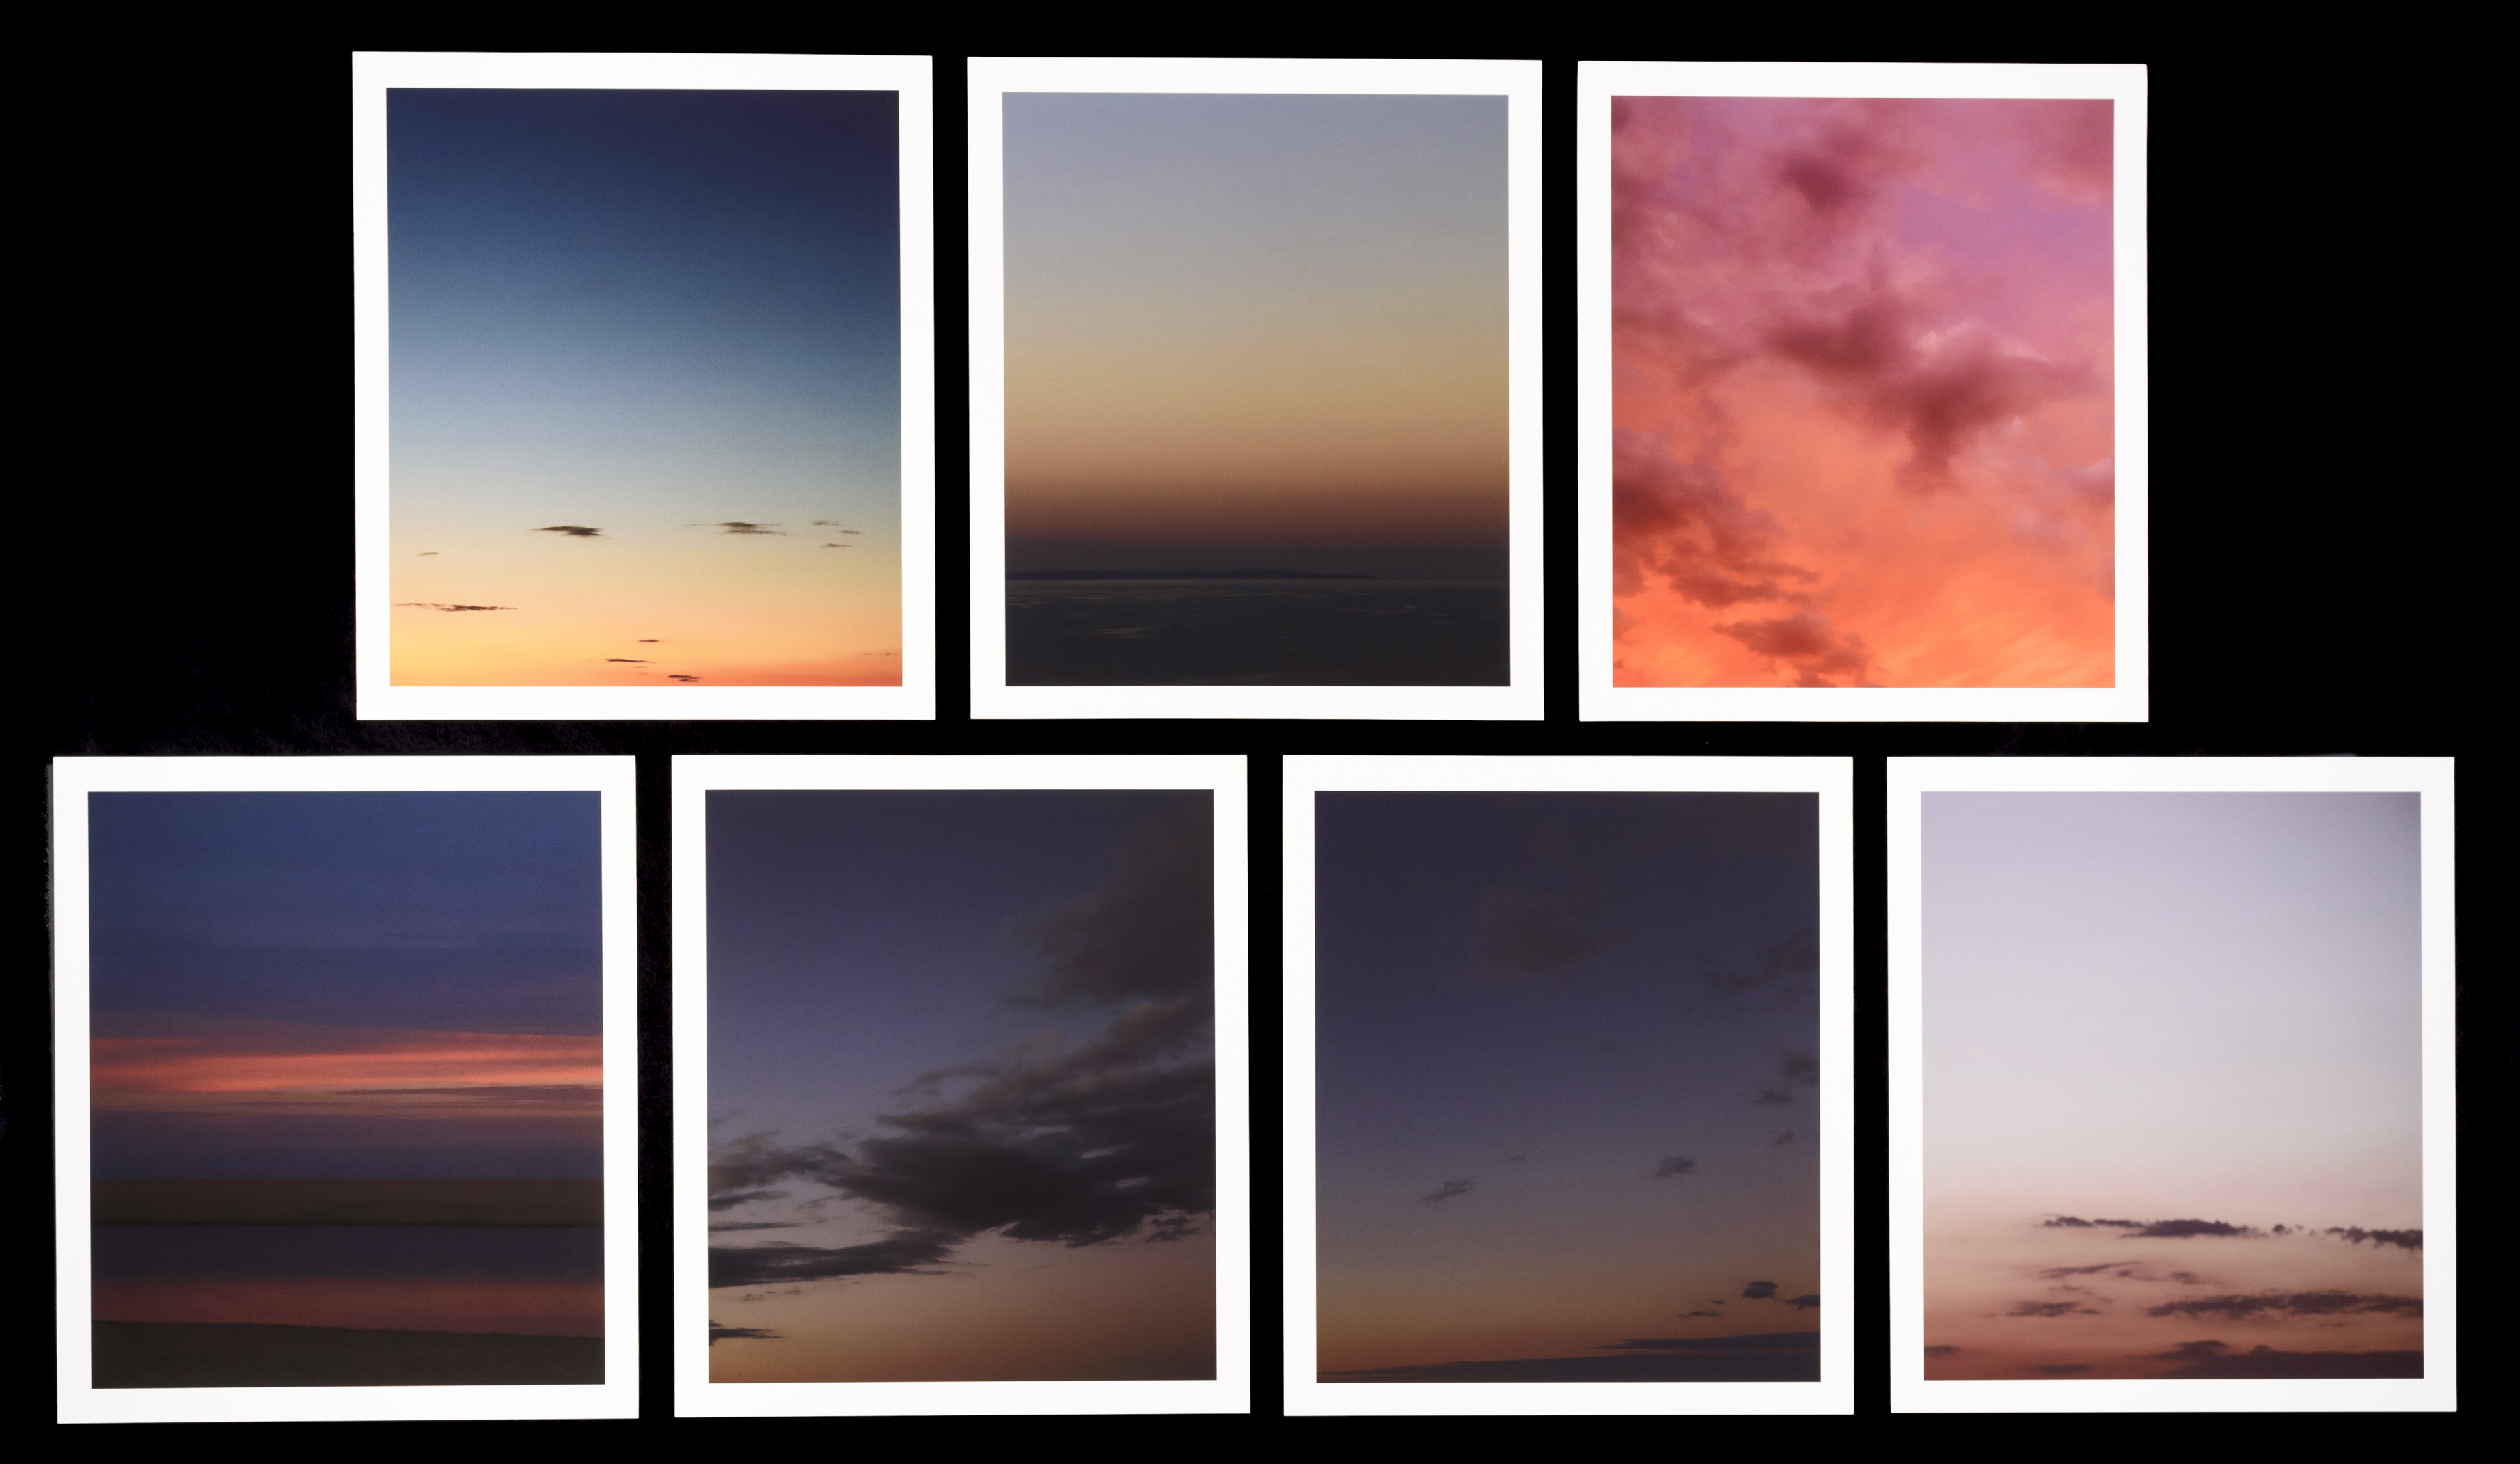 Seven photographs of the sky at sunset.